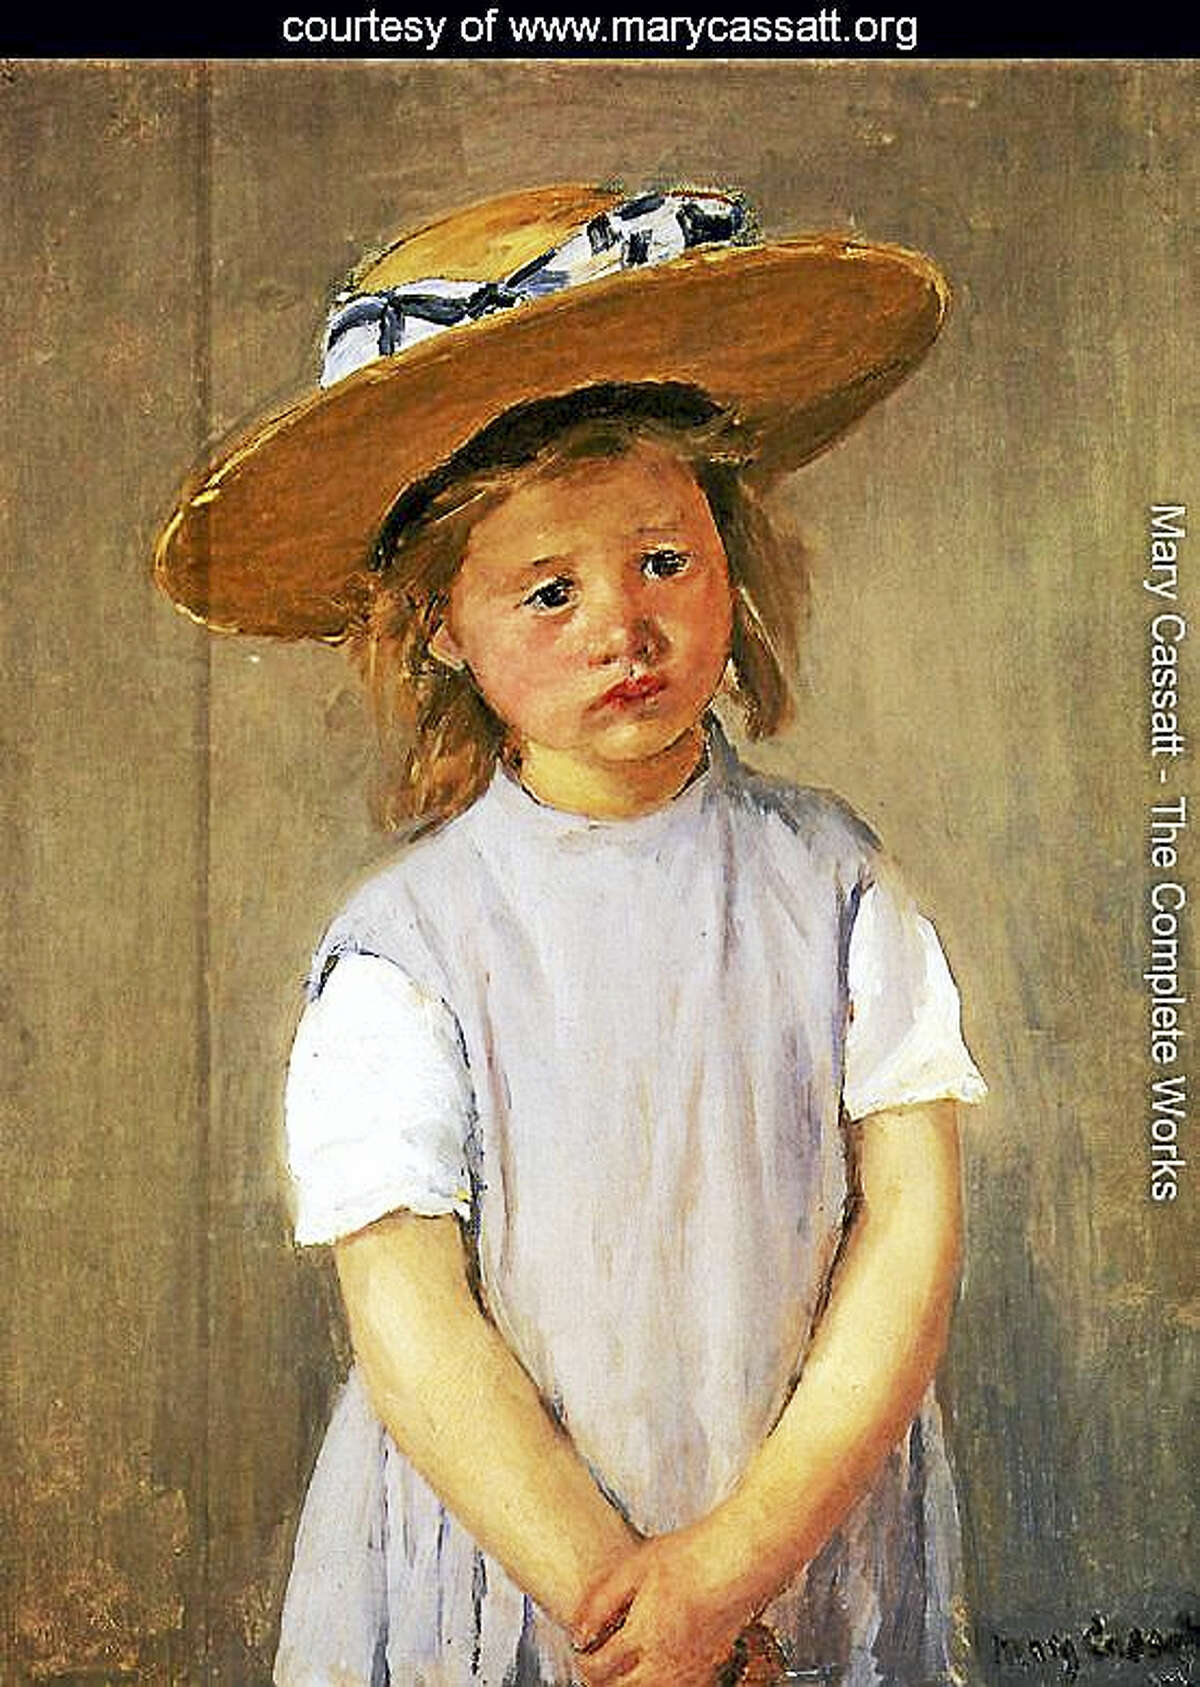 Contributed photoChild in a Straw Hat by Mary Cassatt.